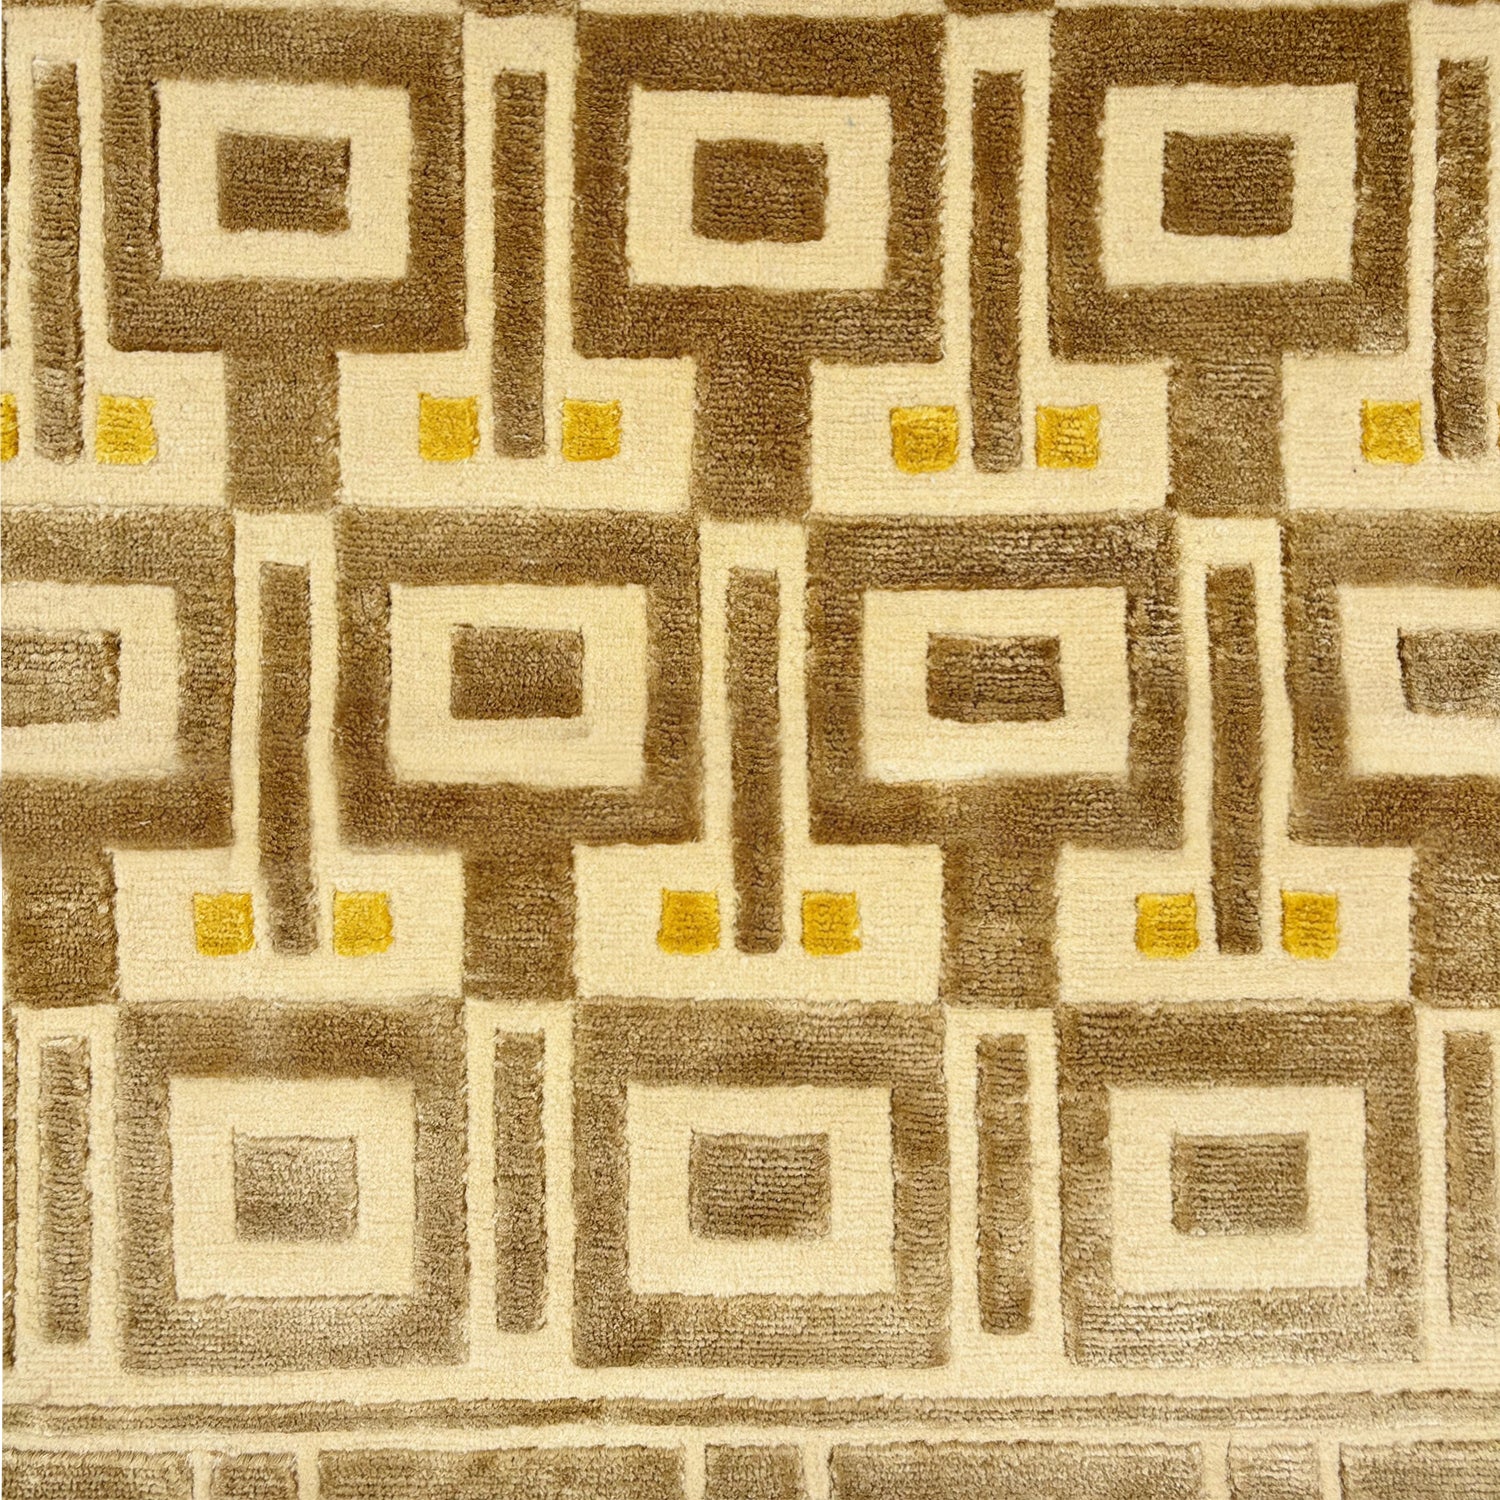 Detail of a geometric patterned rug in cream, brown and yellow.